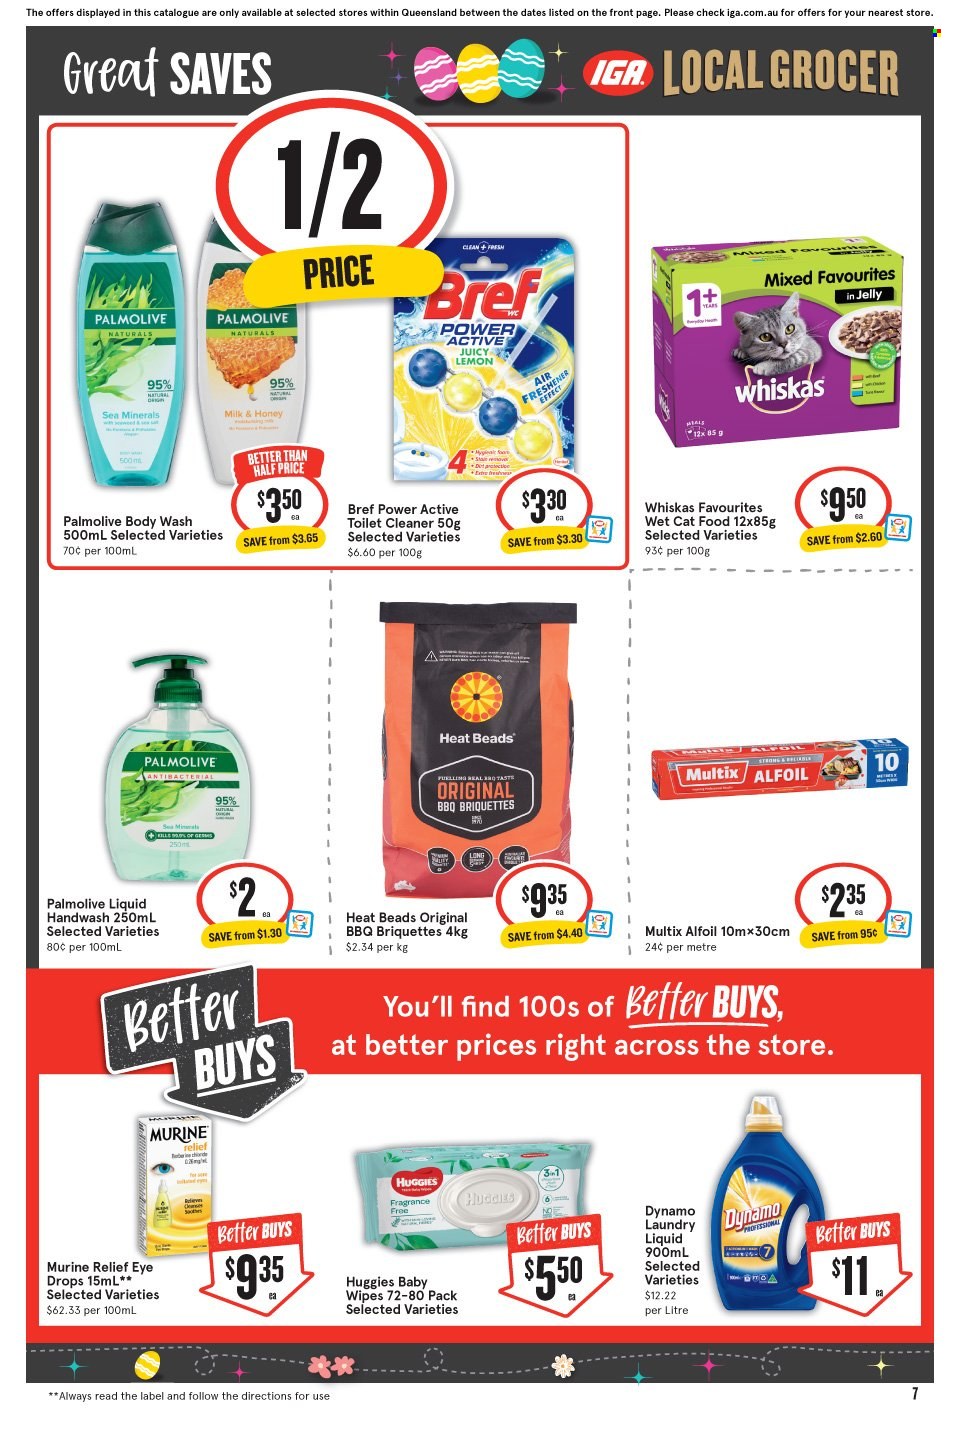 thumbnail - IGA Catalogue - 29 Mar 2023 - 4 Apr 2023 - Sales products - milk, honey, wipes, Huggies, baby wipes, cleaner, toilet cleaner, Bref Power, laundry detergent, body wash, hand wash, Palmolive, animal food, cat food, Whiskas, wet cat food, eye drops. Page 8.